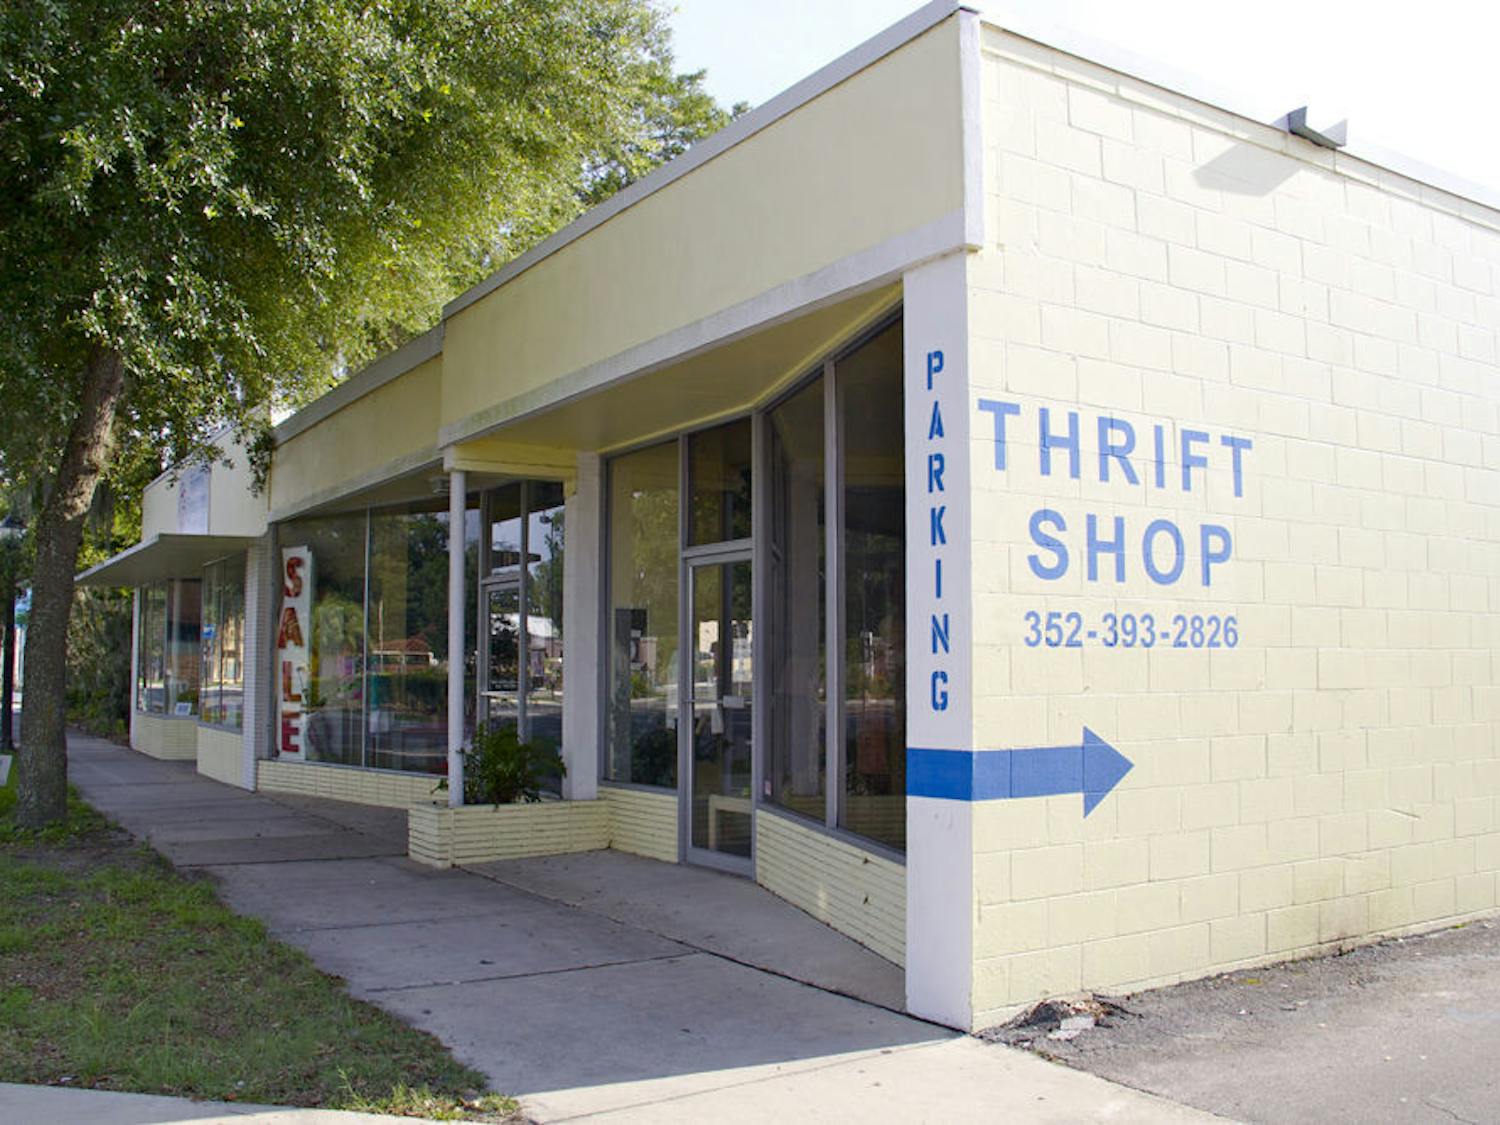 Family Treasures Thrift Shop at 710 N. Main St. keeps its merchandise on fixed prices. None of the clothes cost more than $10.